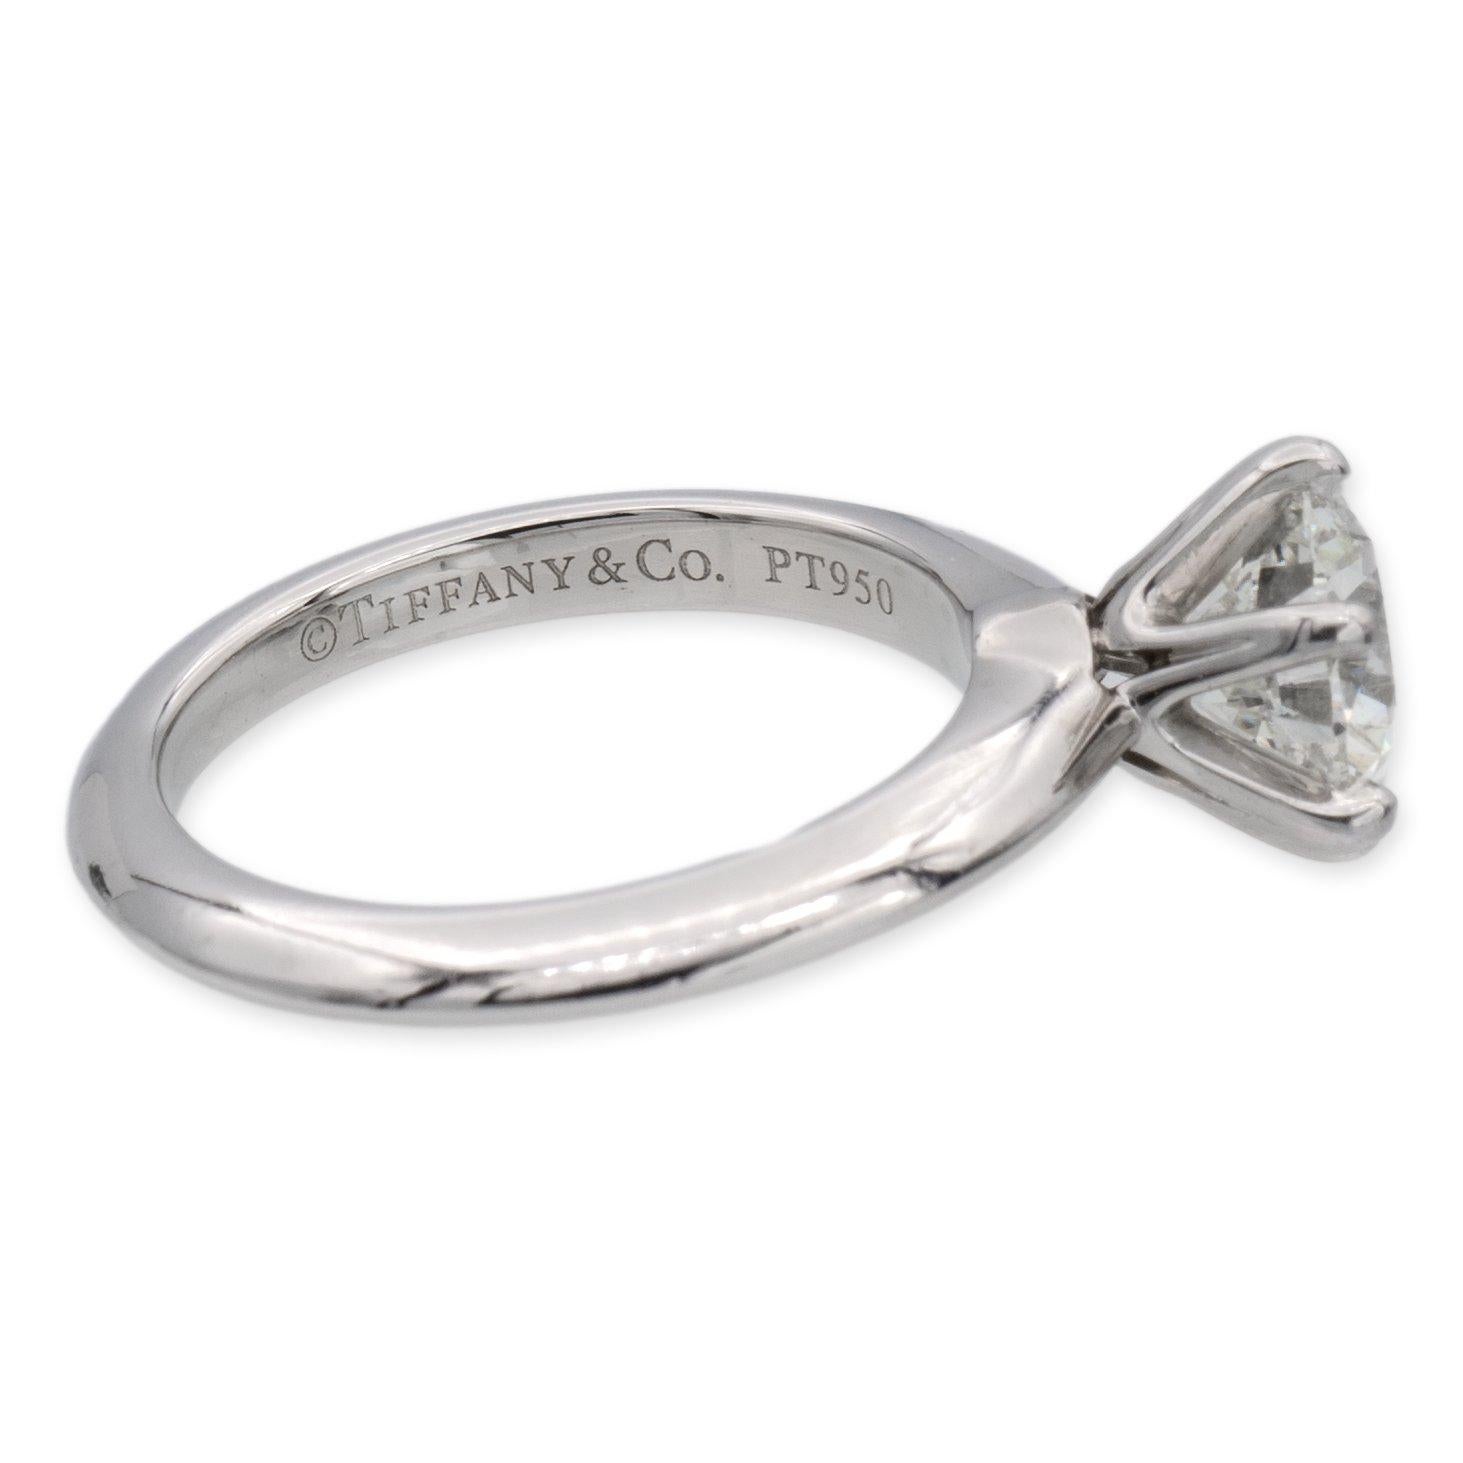 Tiffany & Co. Solitaire diamond engagement ring finely crafted in a six prong platinum mounting featuring a 1.04 carat round brilliant diamond center graded I color and VS1 Clarity. The diamond is inscribed with Tiffanys serial numbers and has